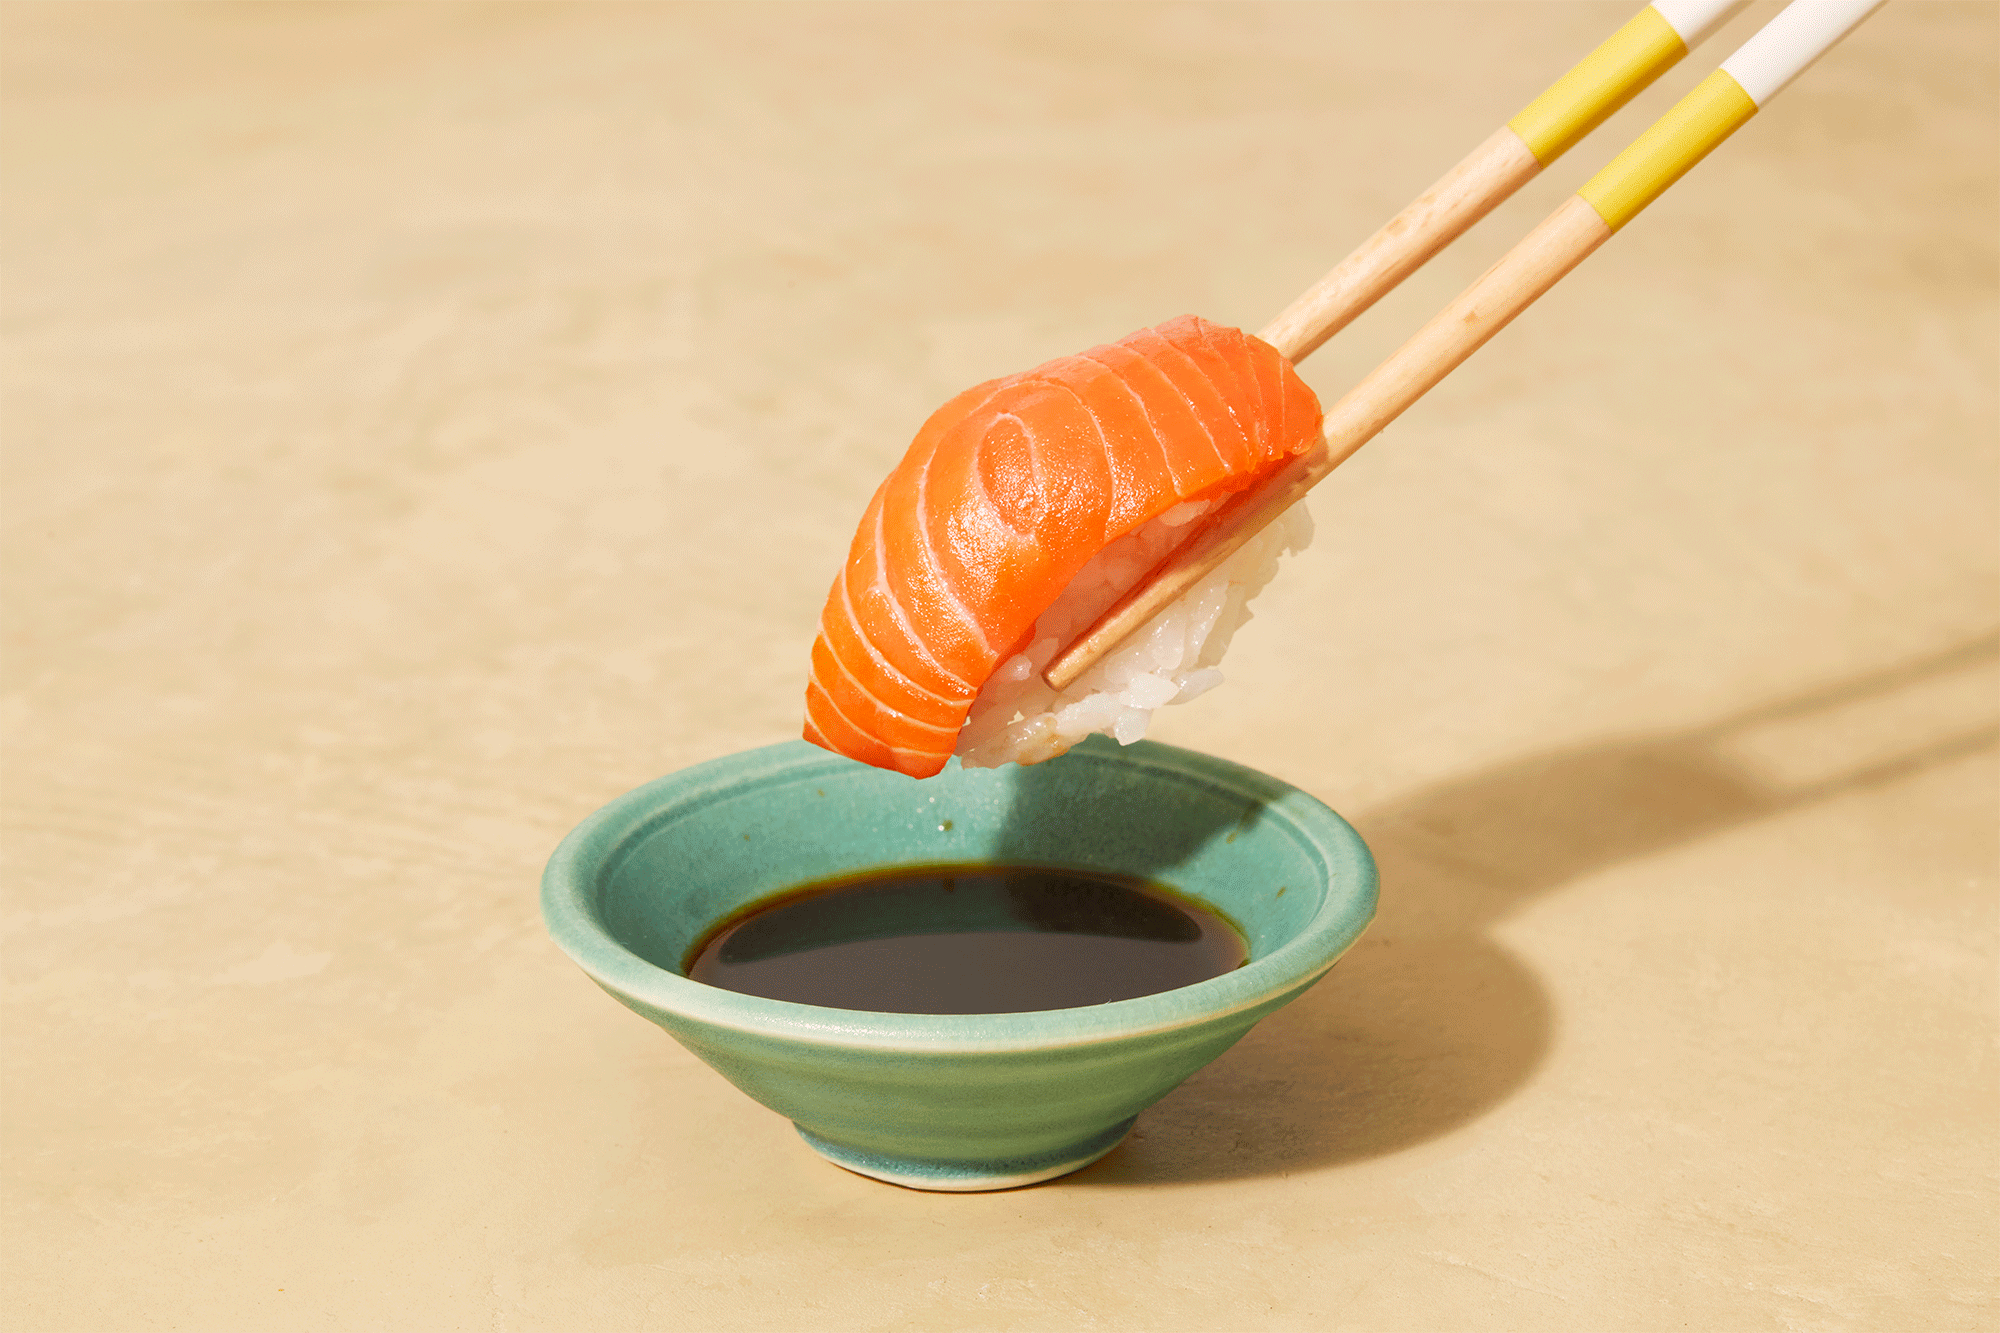 Instacart_EatNow_Sushi_Dunk_A0894_stop_motion-v2_no_ause.gif